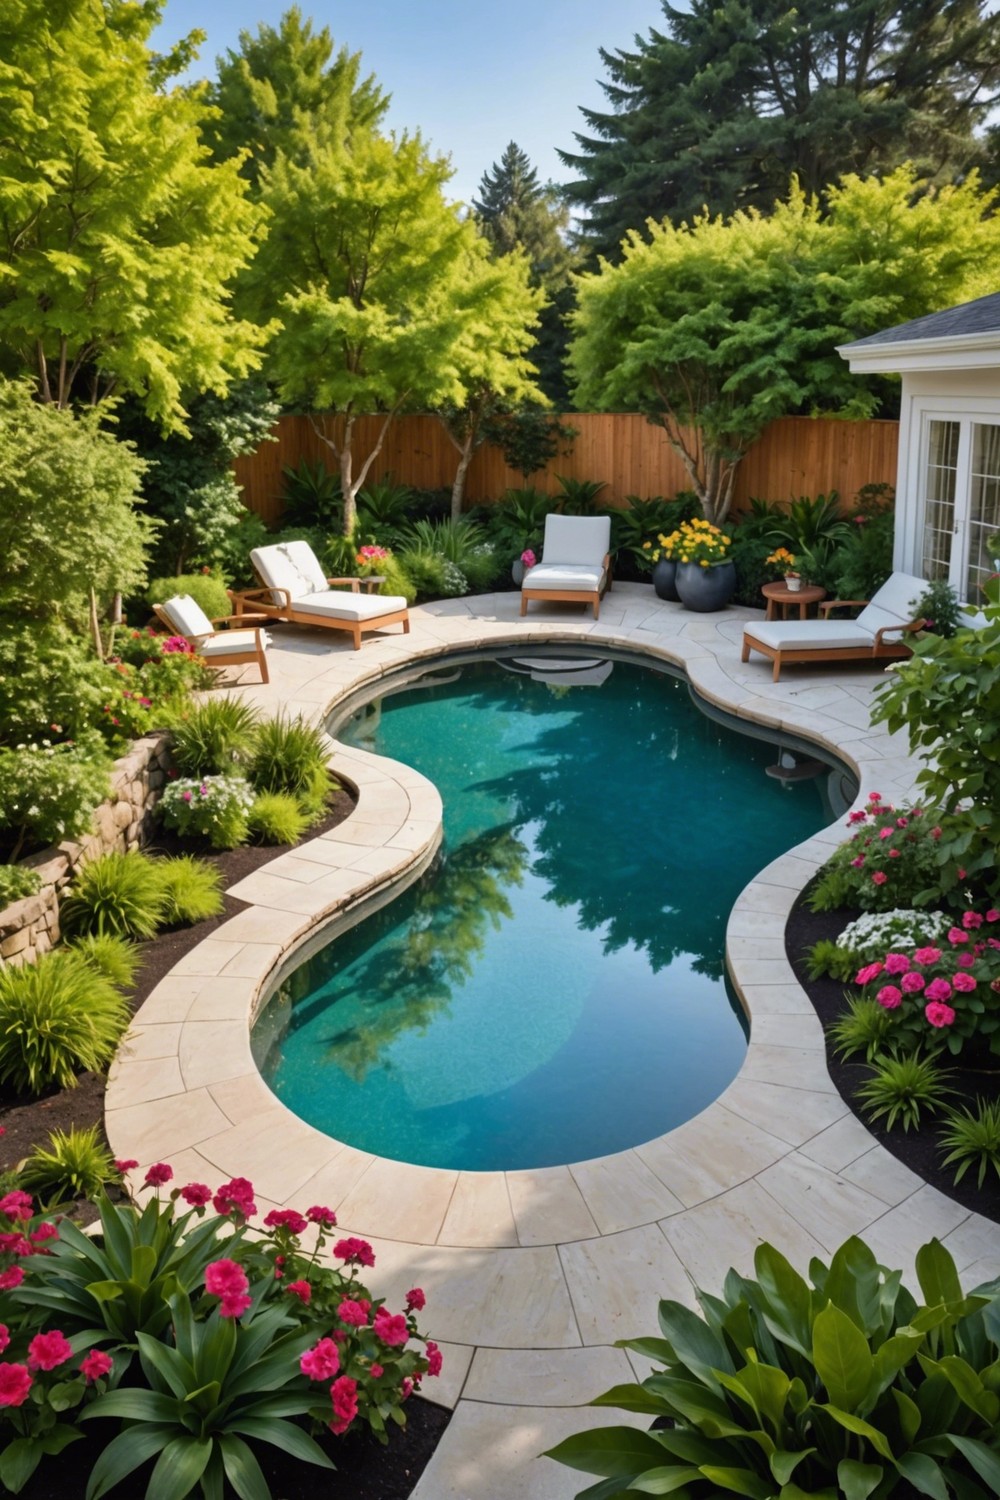 Compact Curved Decks for Small Yards